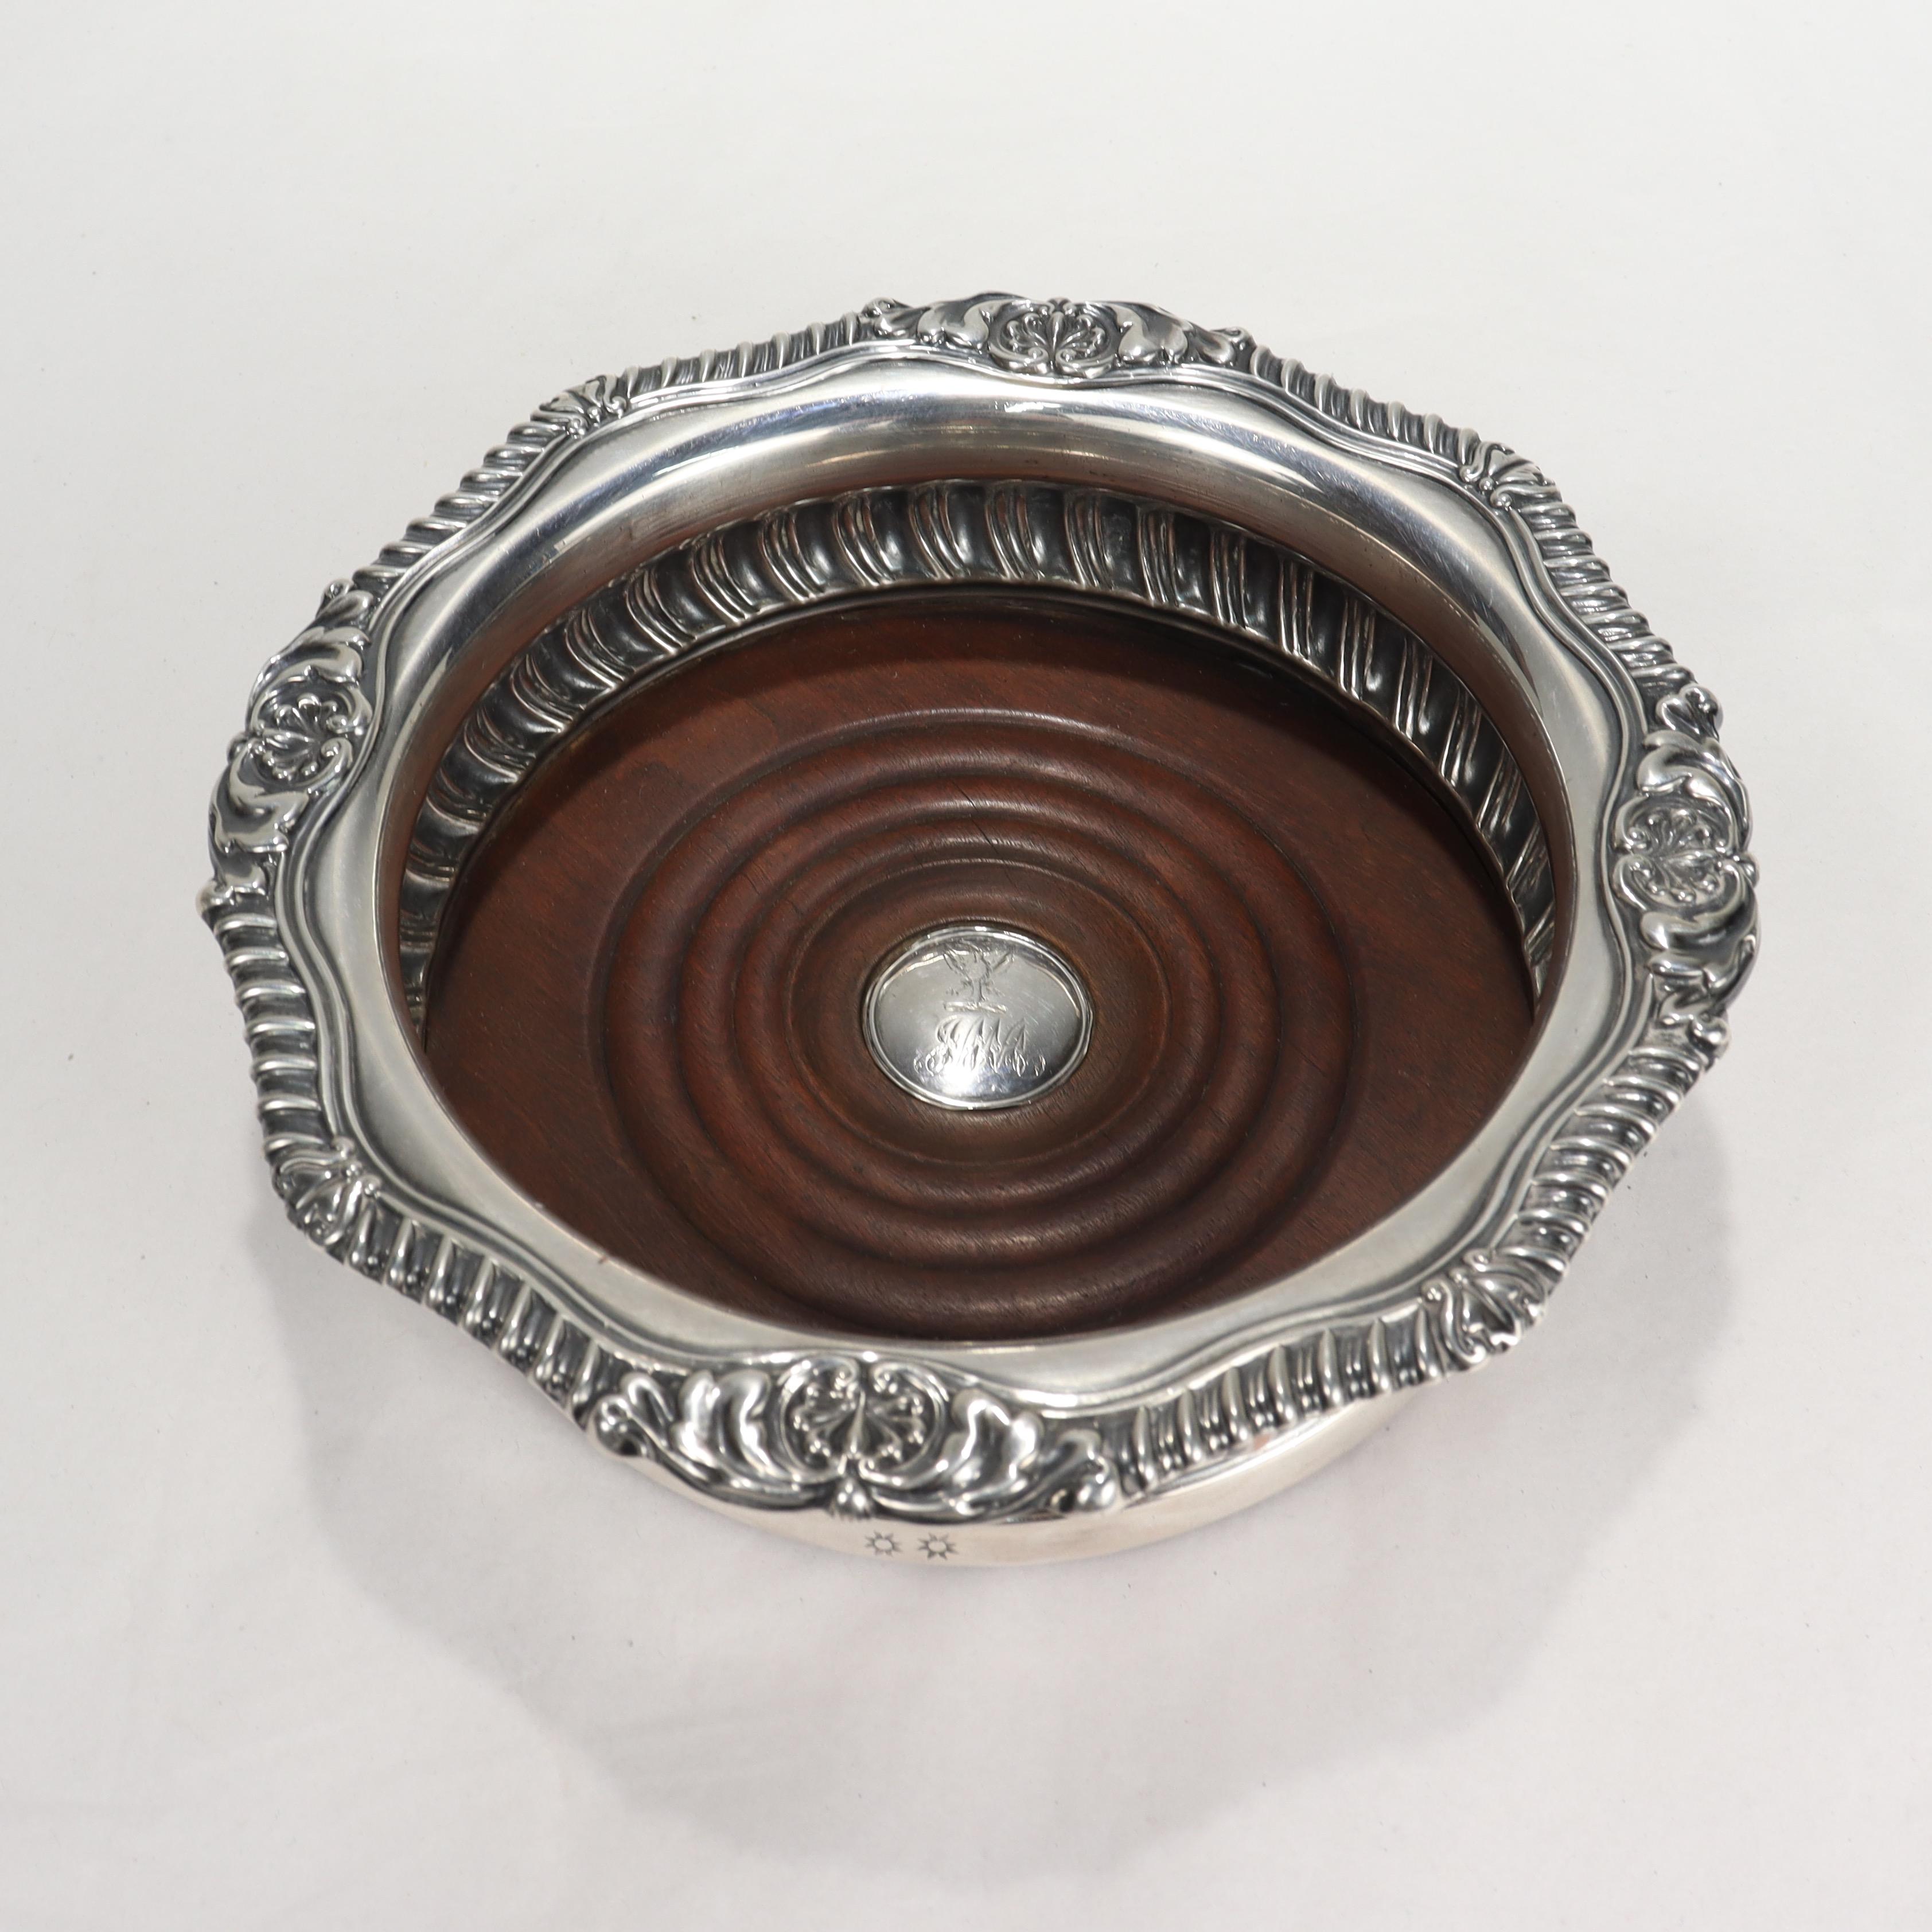 A fine antique Georgian English silver plated wine coaster.

By Matthew Boulton. 

The insert in the middle is decorated with a two-headed bird and monogrammed 